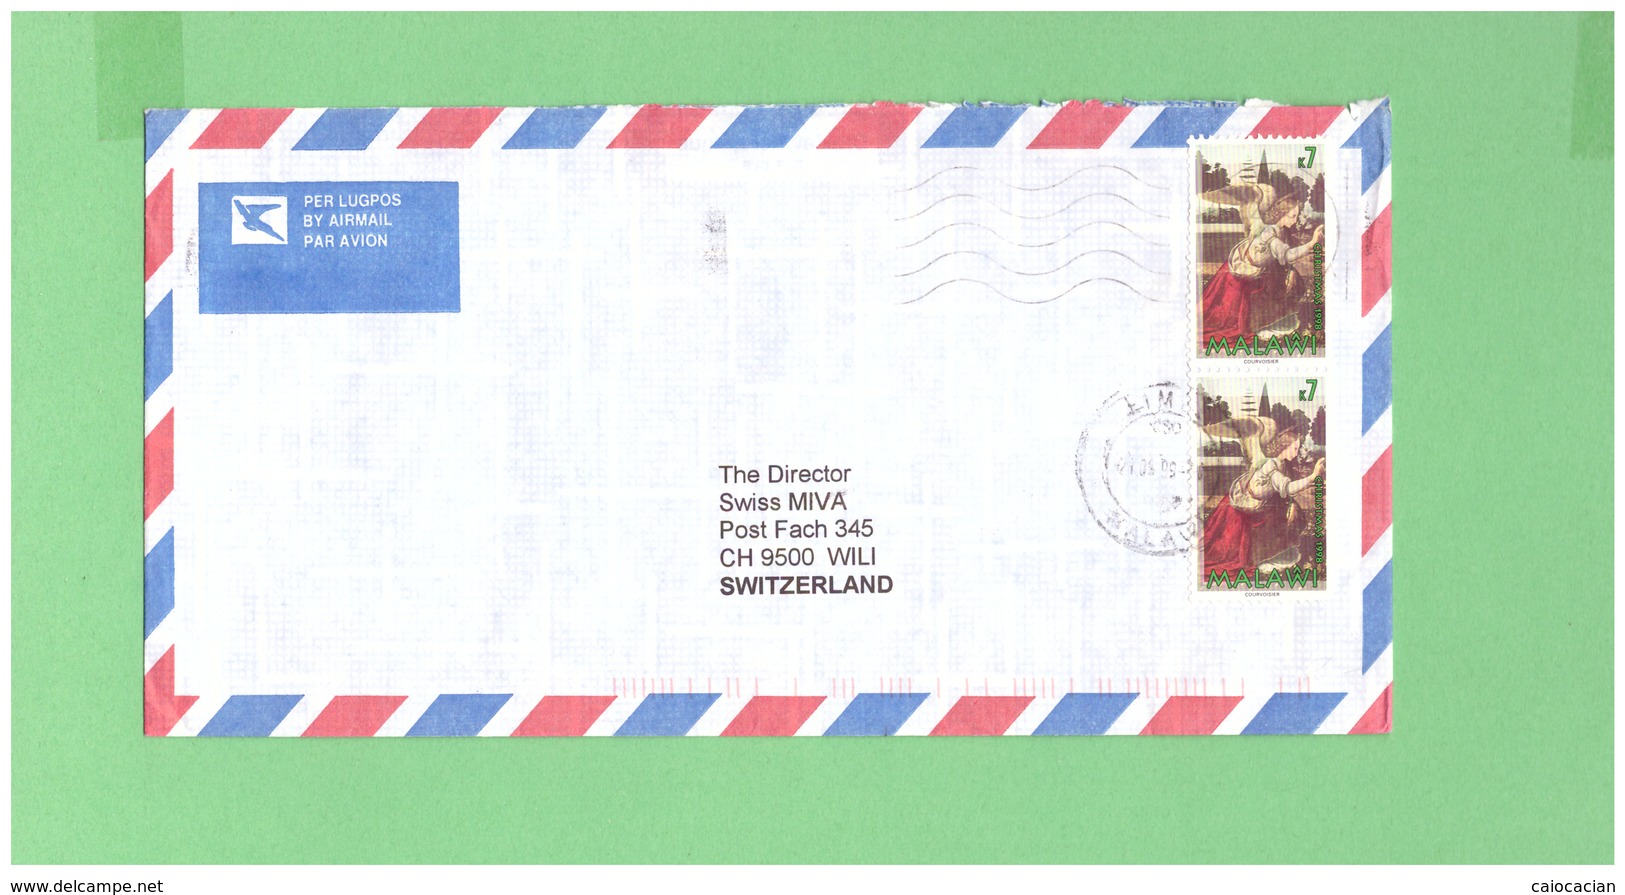 MALAWI 1999 AIR MAIL COUVERT WITH 2 STAMPS TO SWISS - Malawi (1964-...)